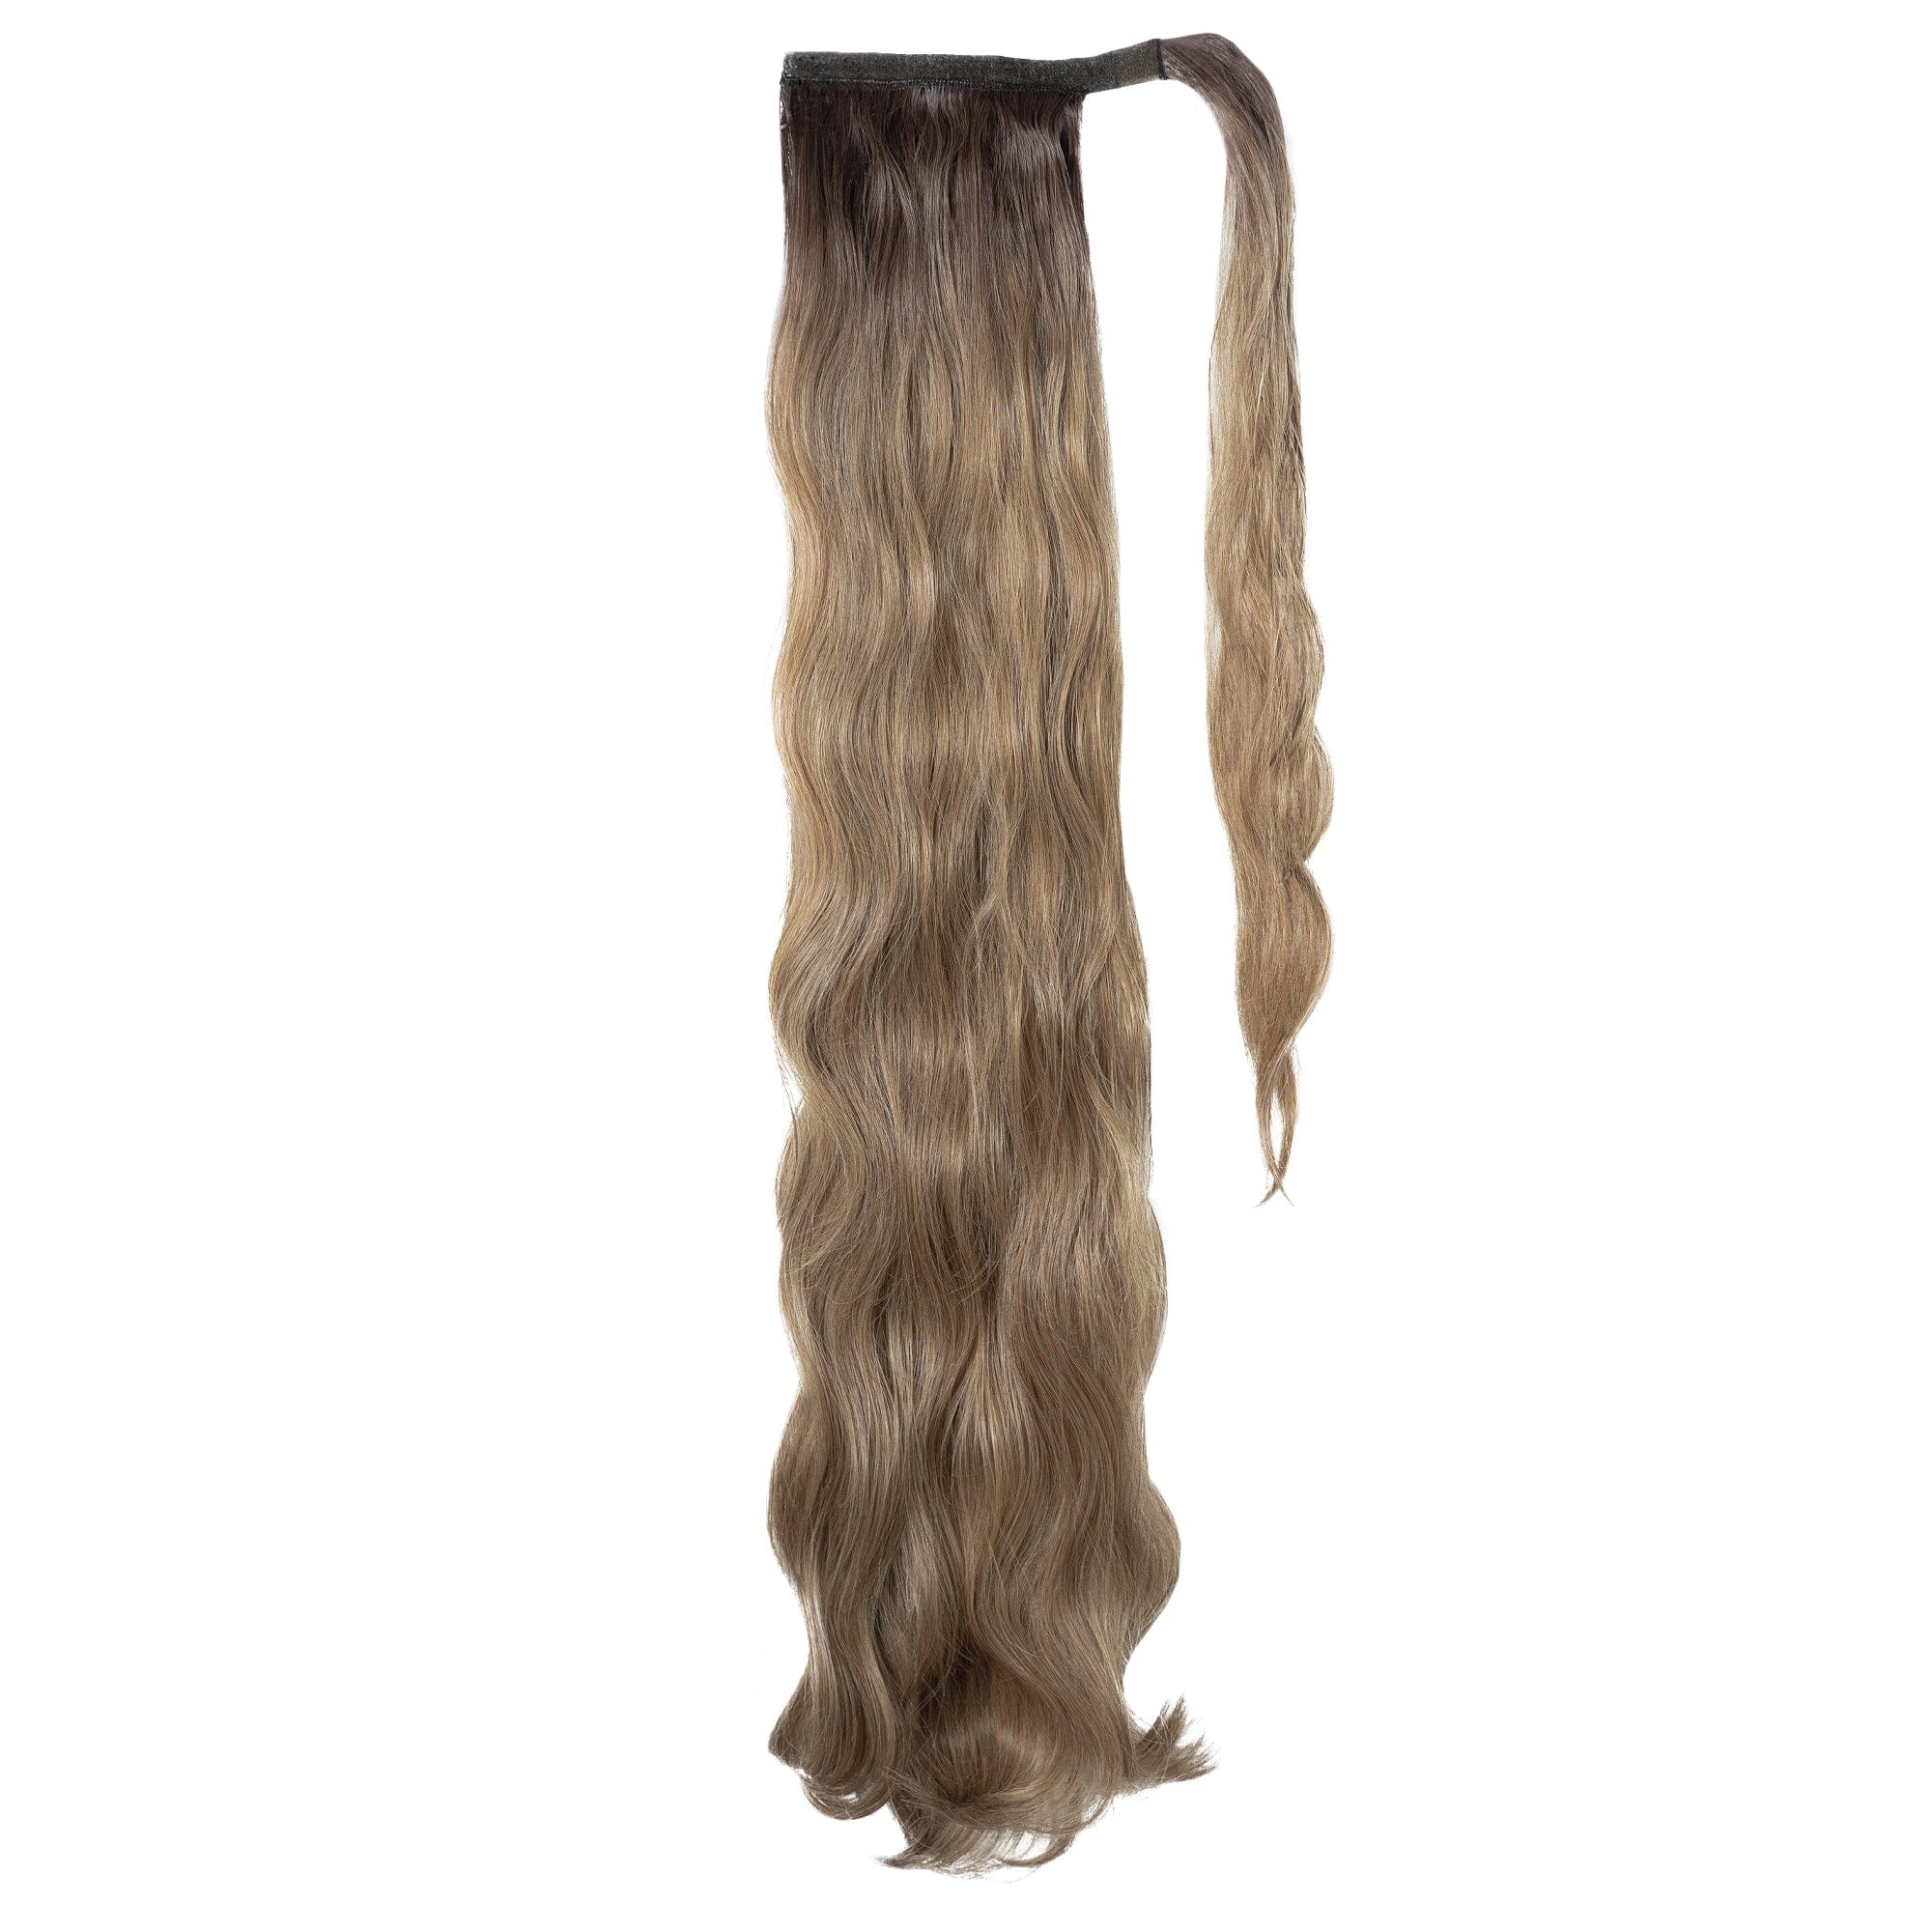 Long Clip-In Ponytails (22" - 30") Clip In Ponytail Easilocks 30"Body Wave Clip-In Ponytail Honey Balayage 